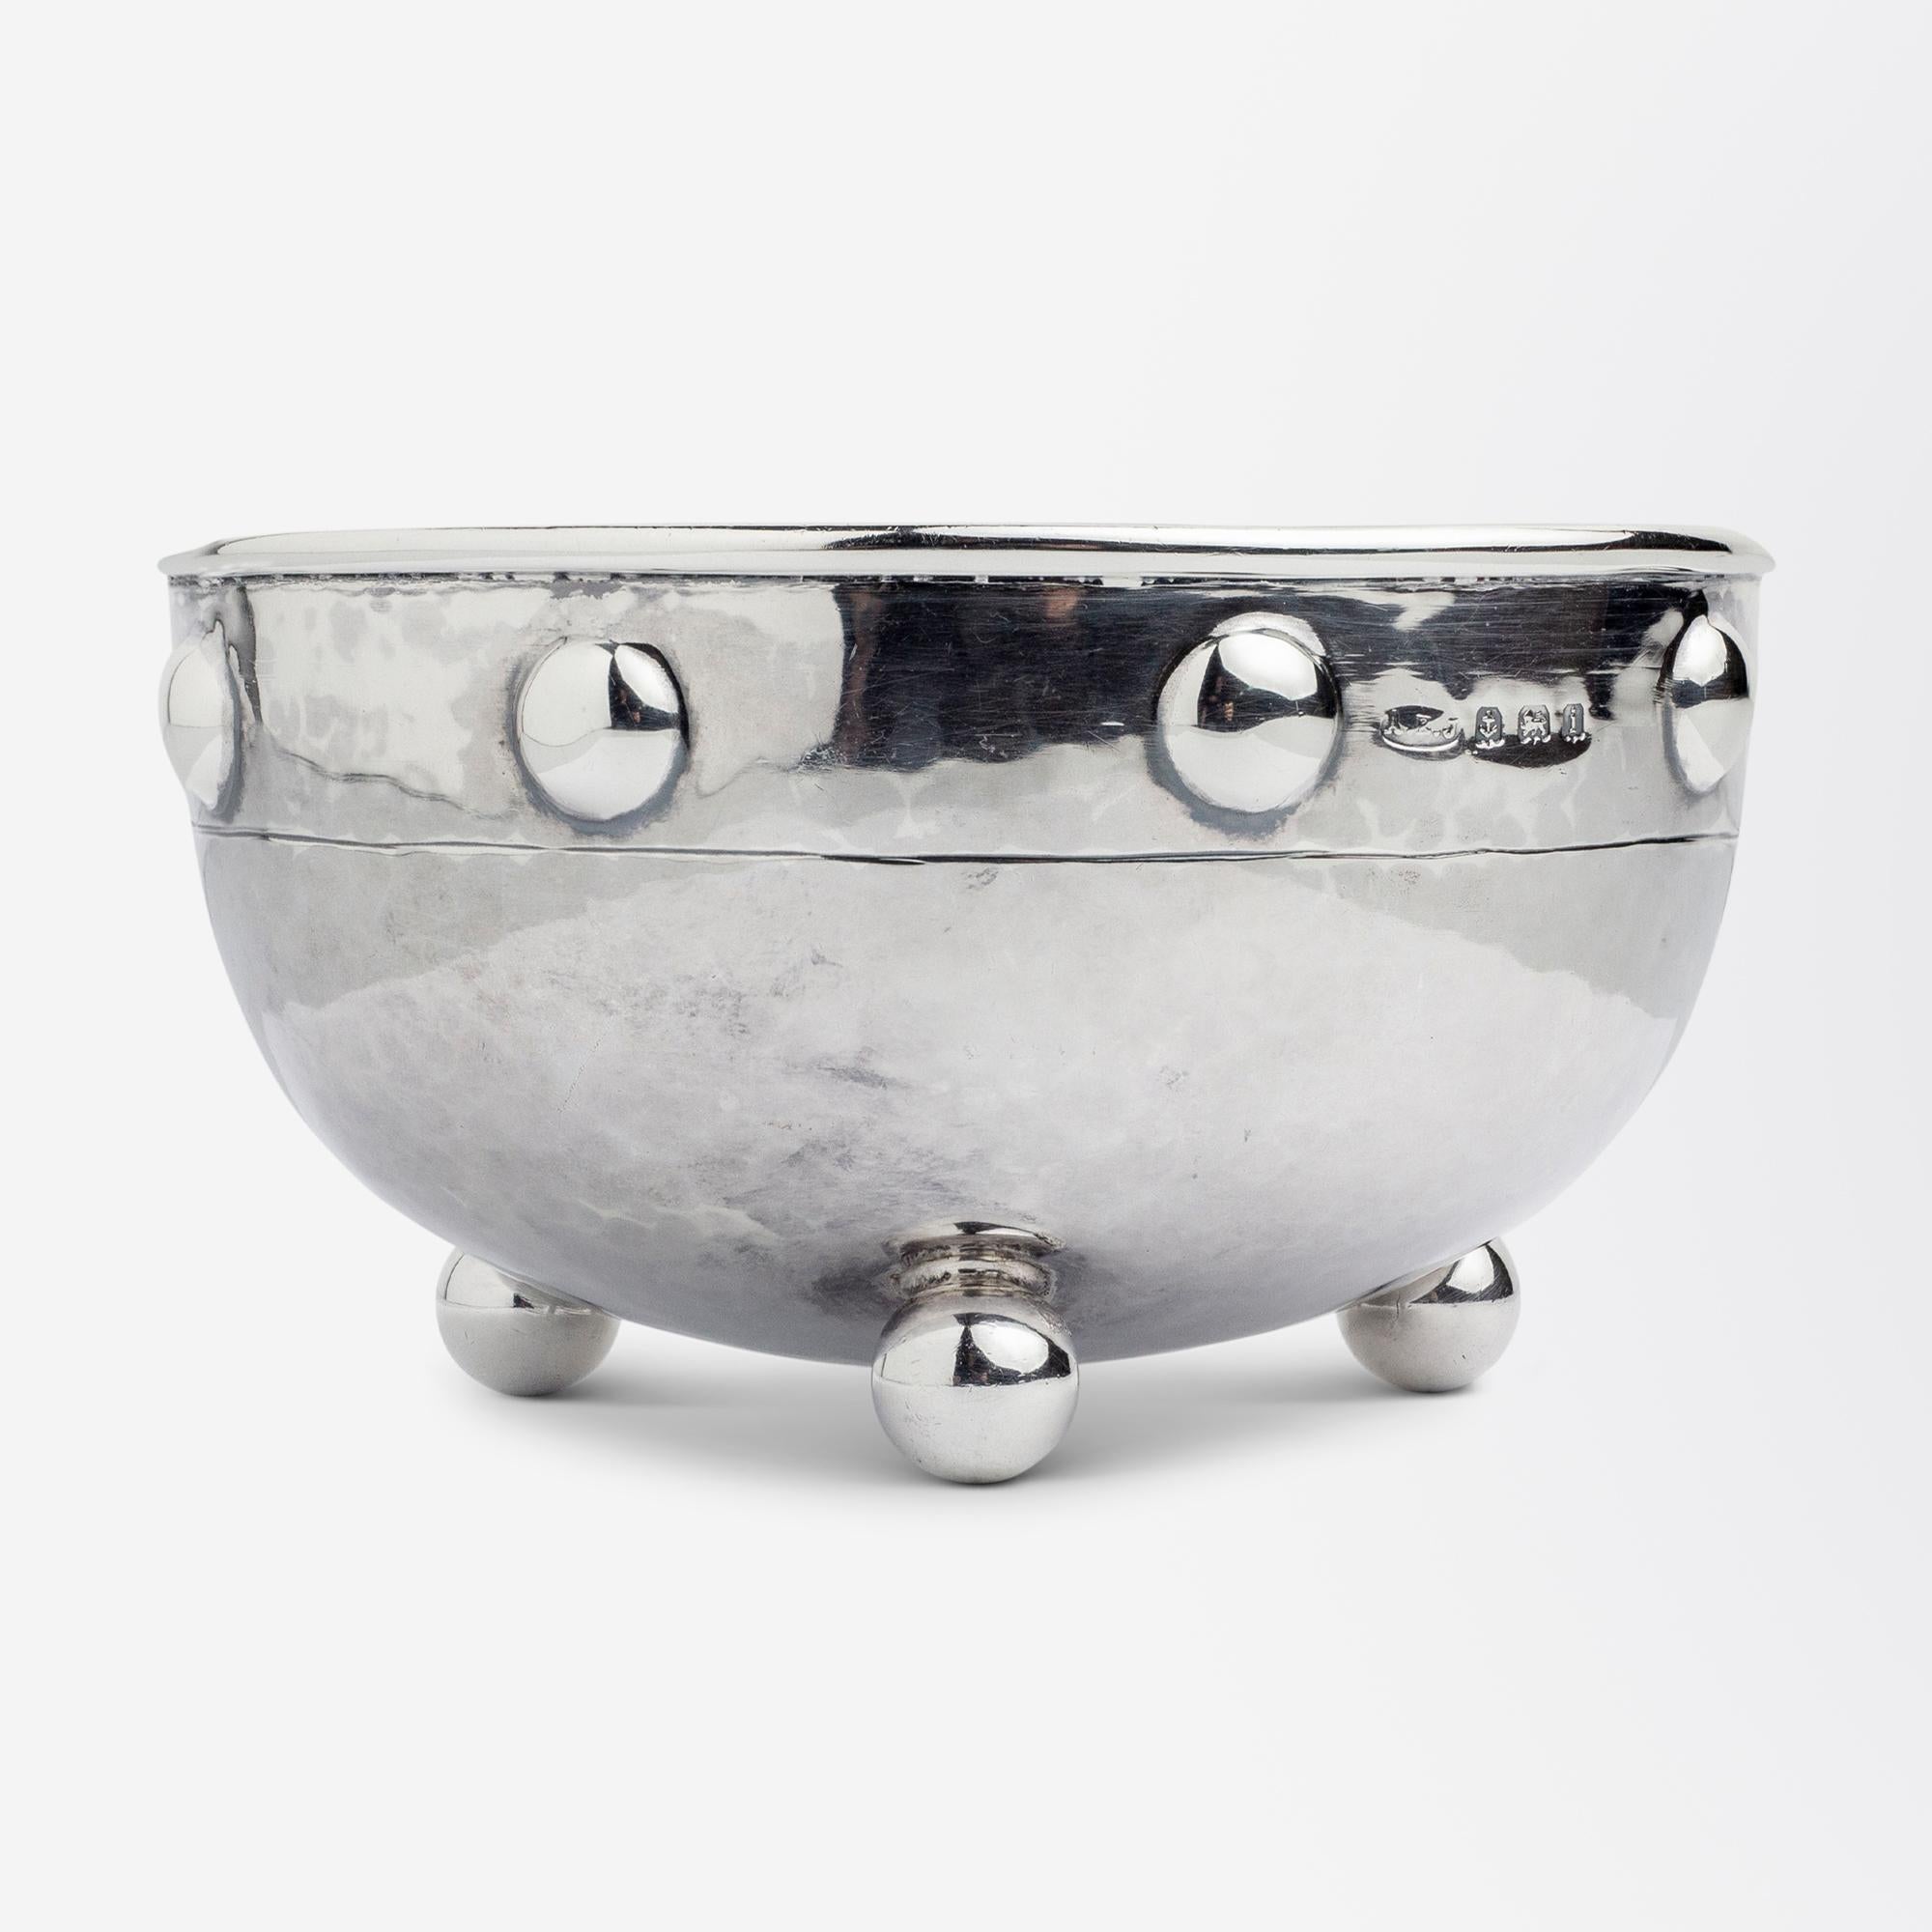 A small, hand-wrought, sterling silver, Arts & Crafts era bowl by English silversmith Albert Edward Jones (1878-1954). The bowl which is minimal in its decoration sits atop of three sterling silver ball feet and features a rim of silver buttons. The